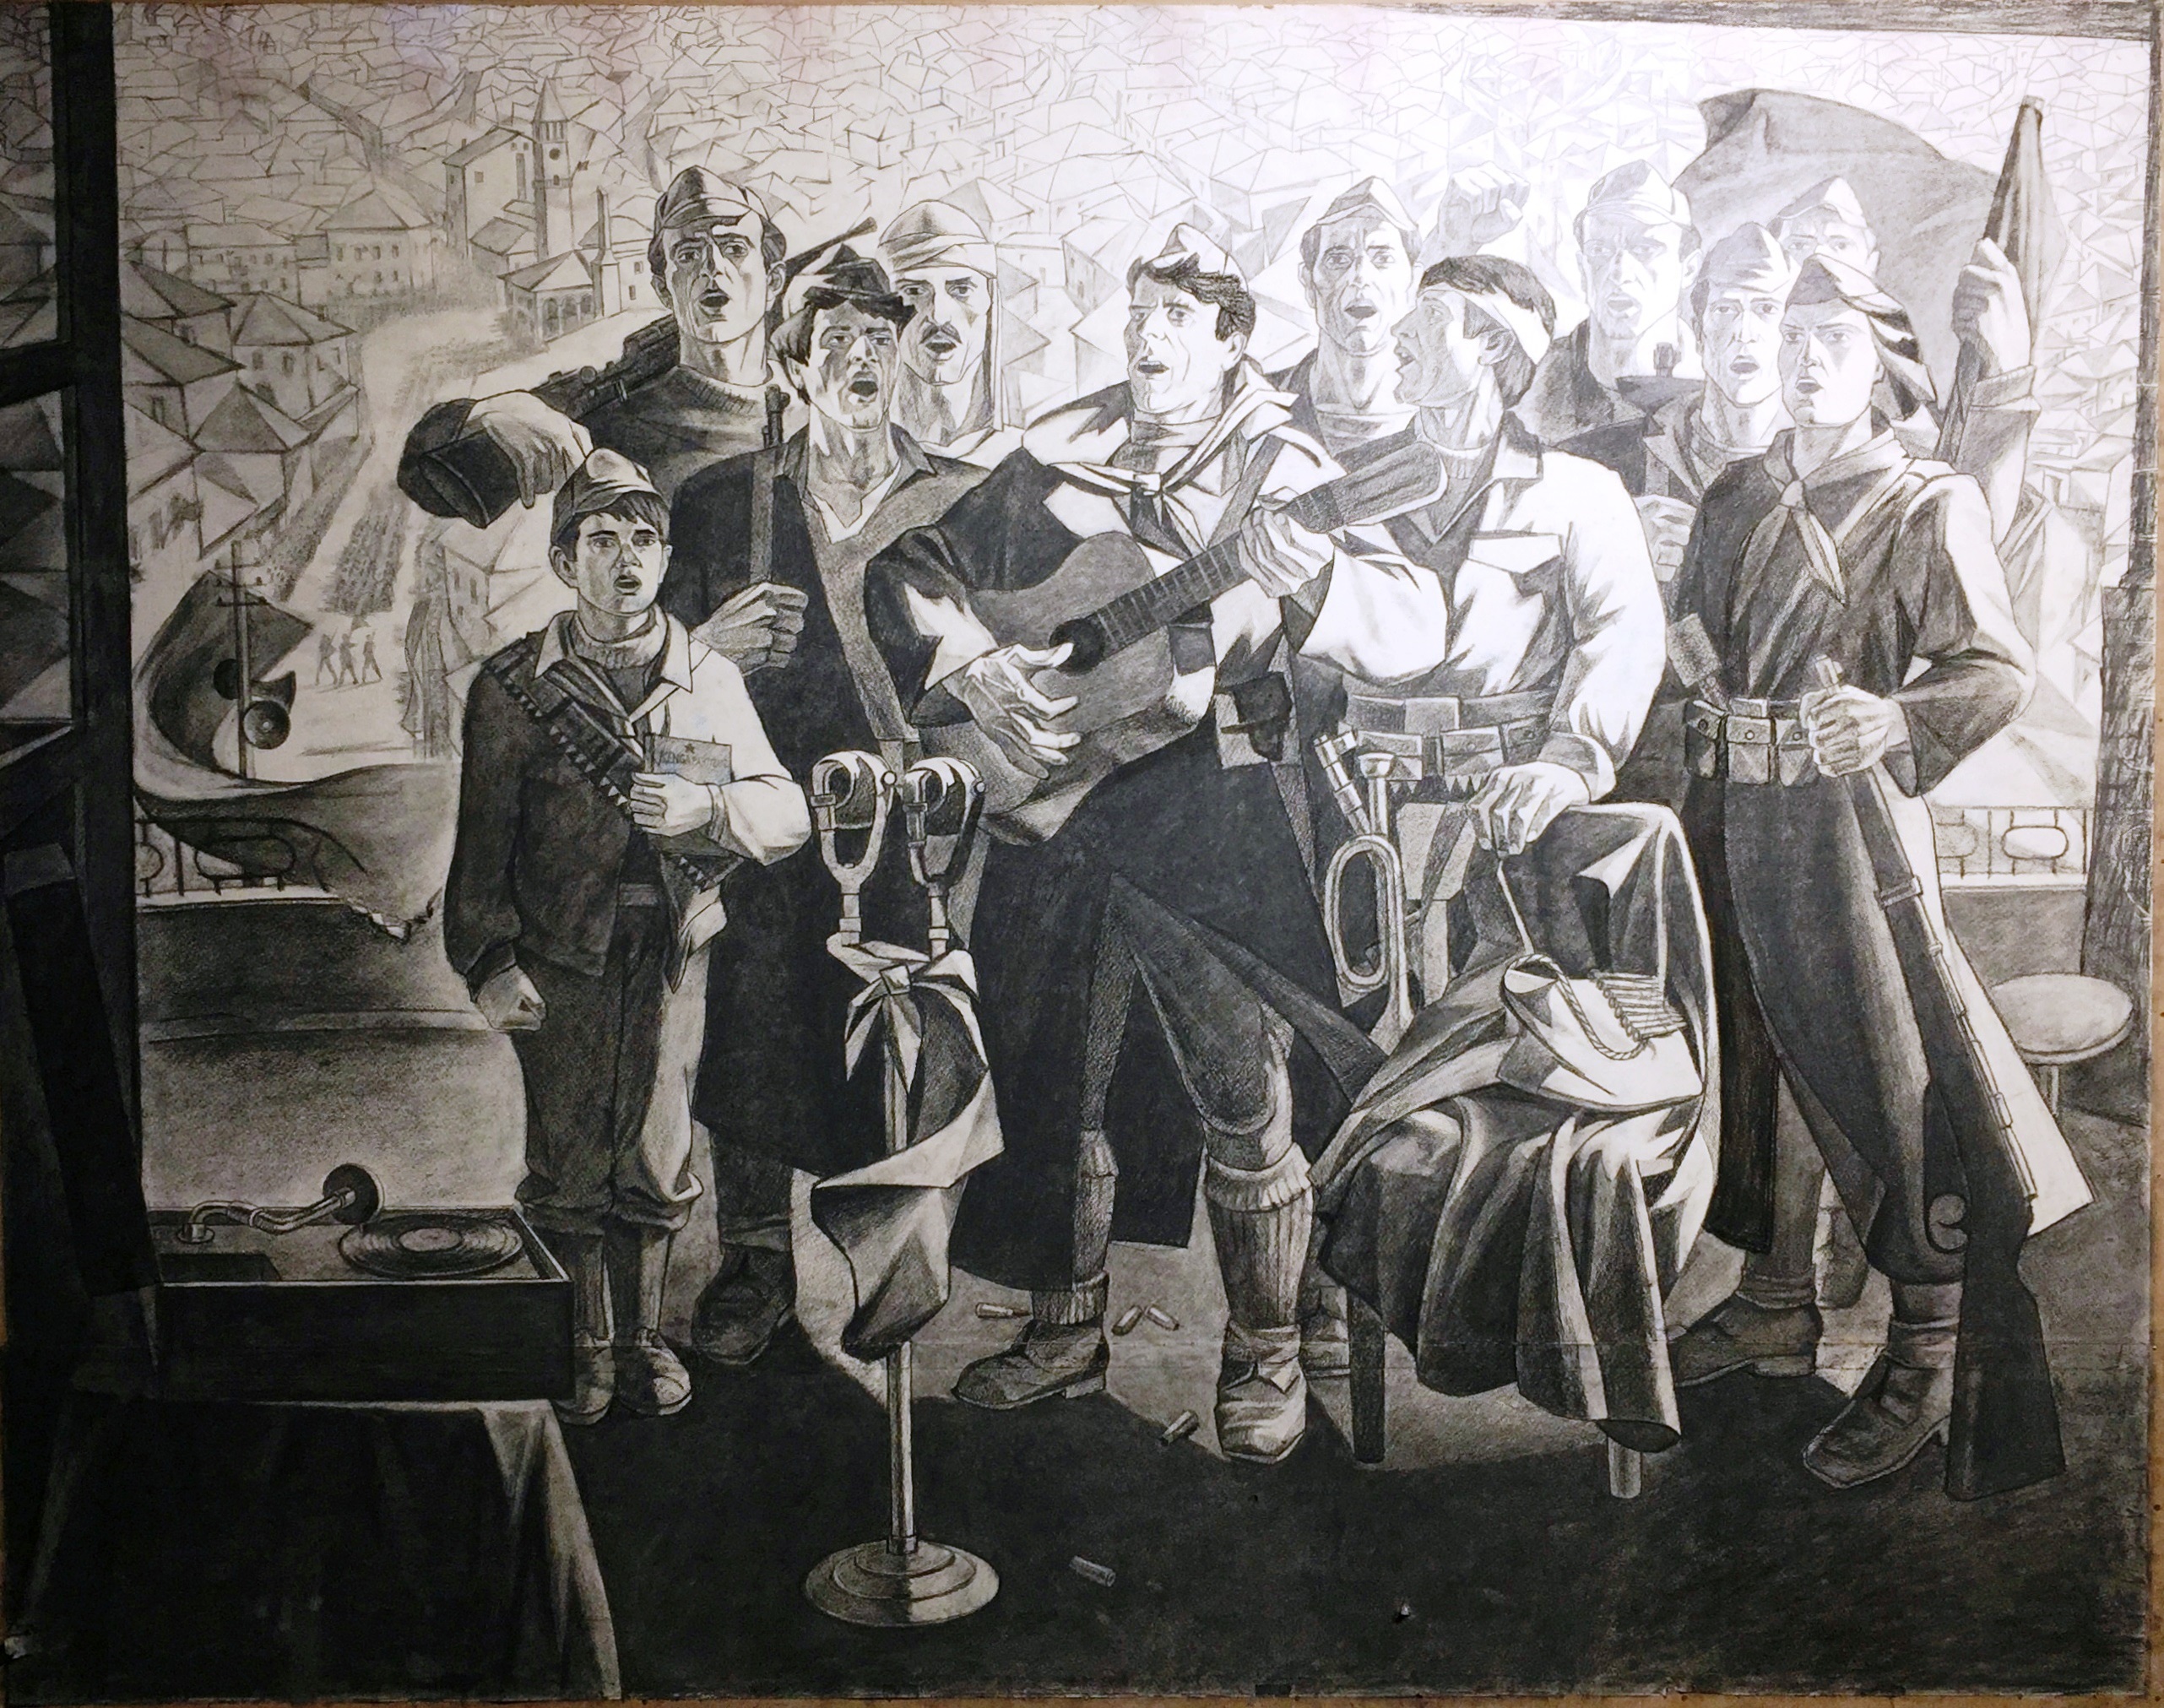 Pëllumb Bylyku, (1989) First Partizan song from Radio Tirana _ Charcoal and black pencil on paper _ 116 x 147.5 cm